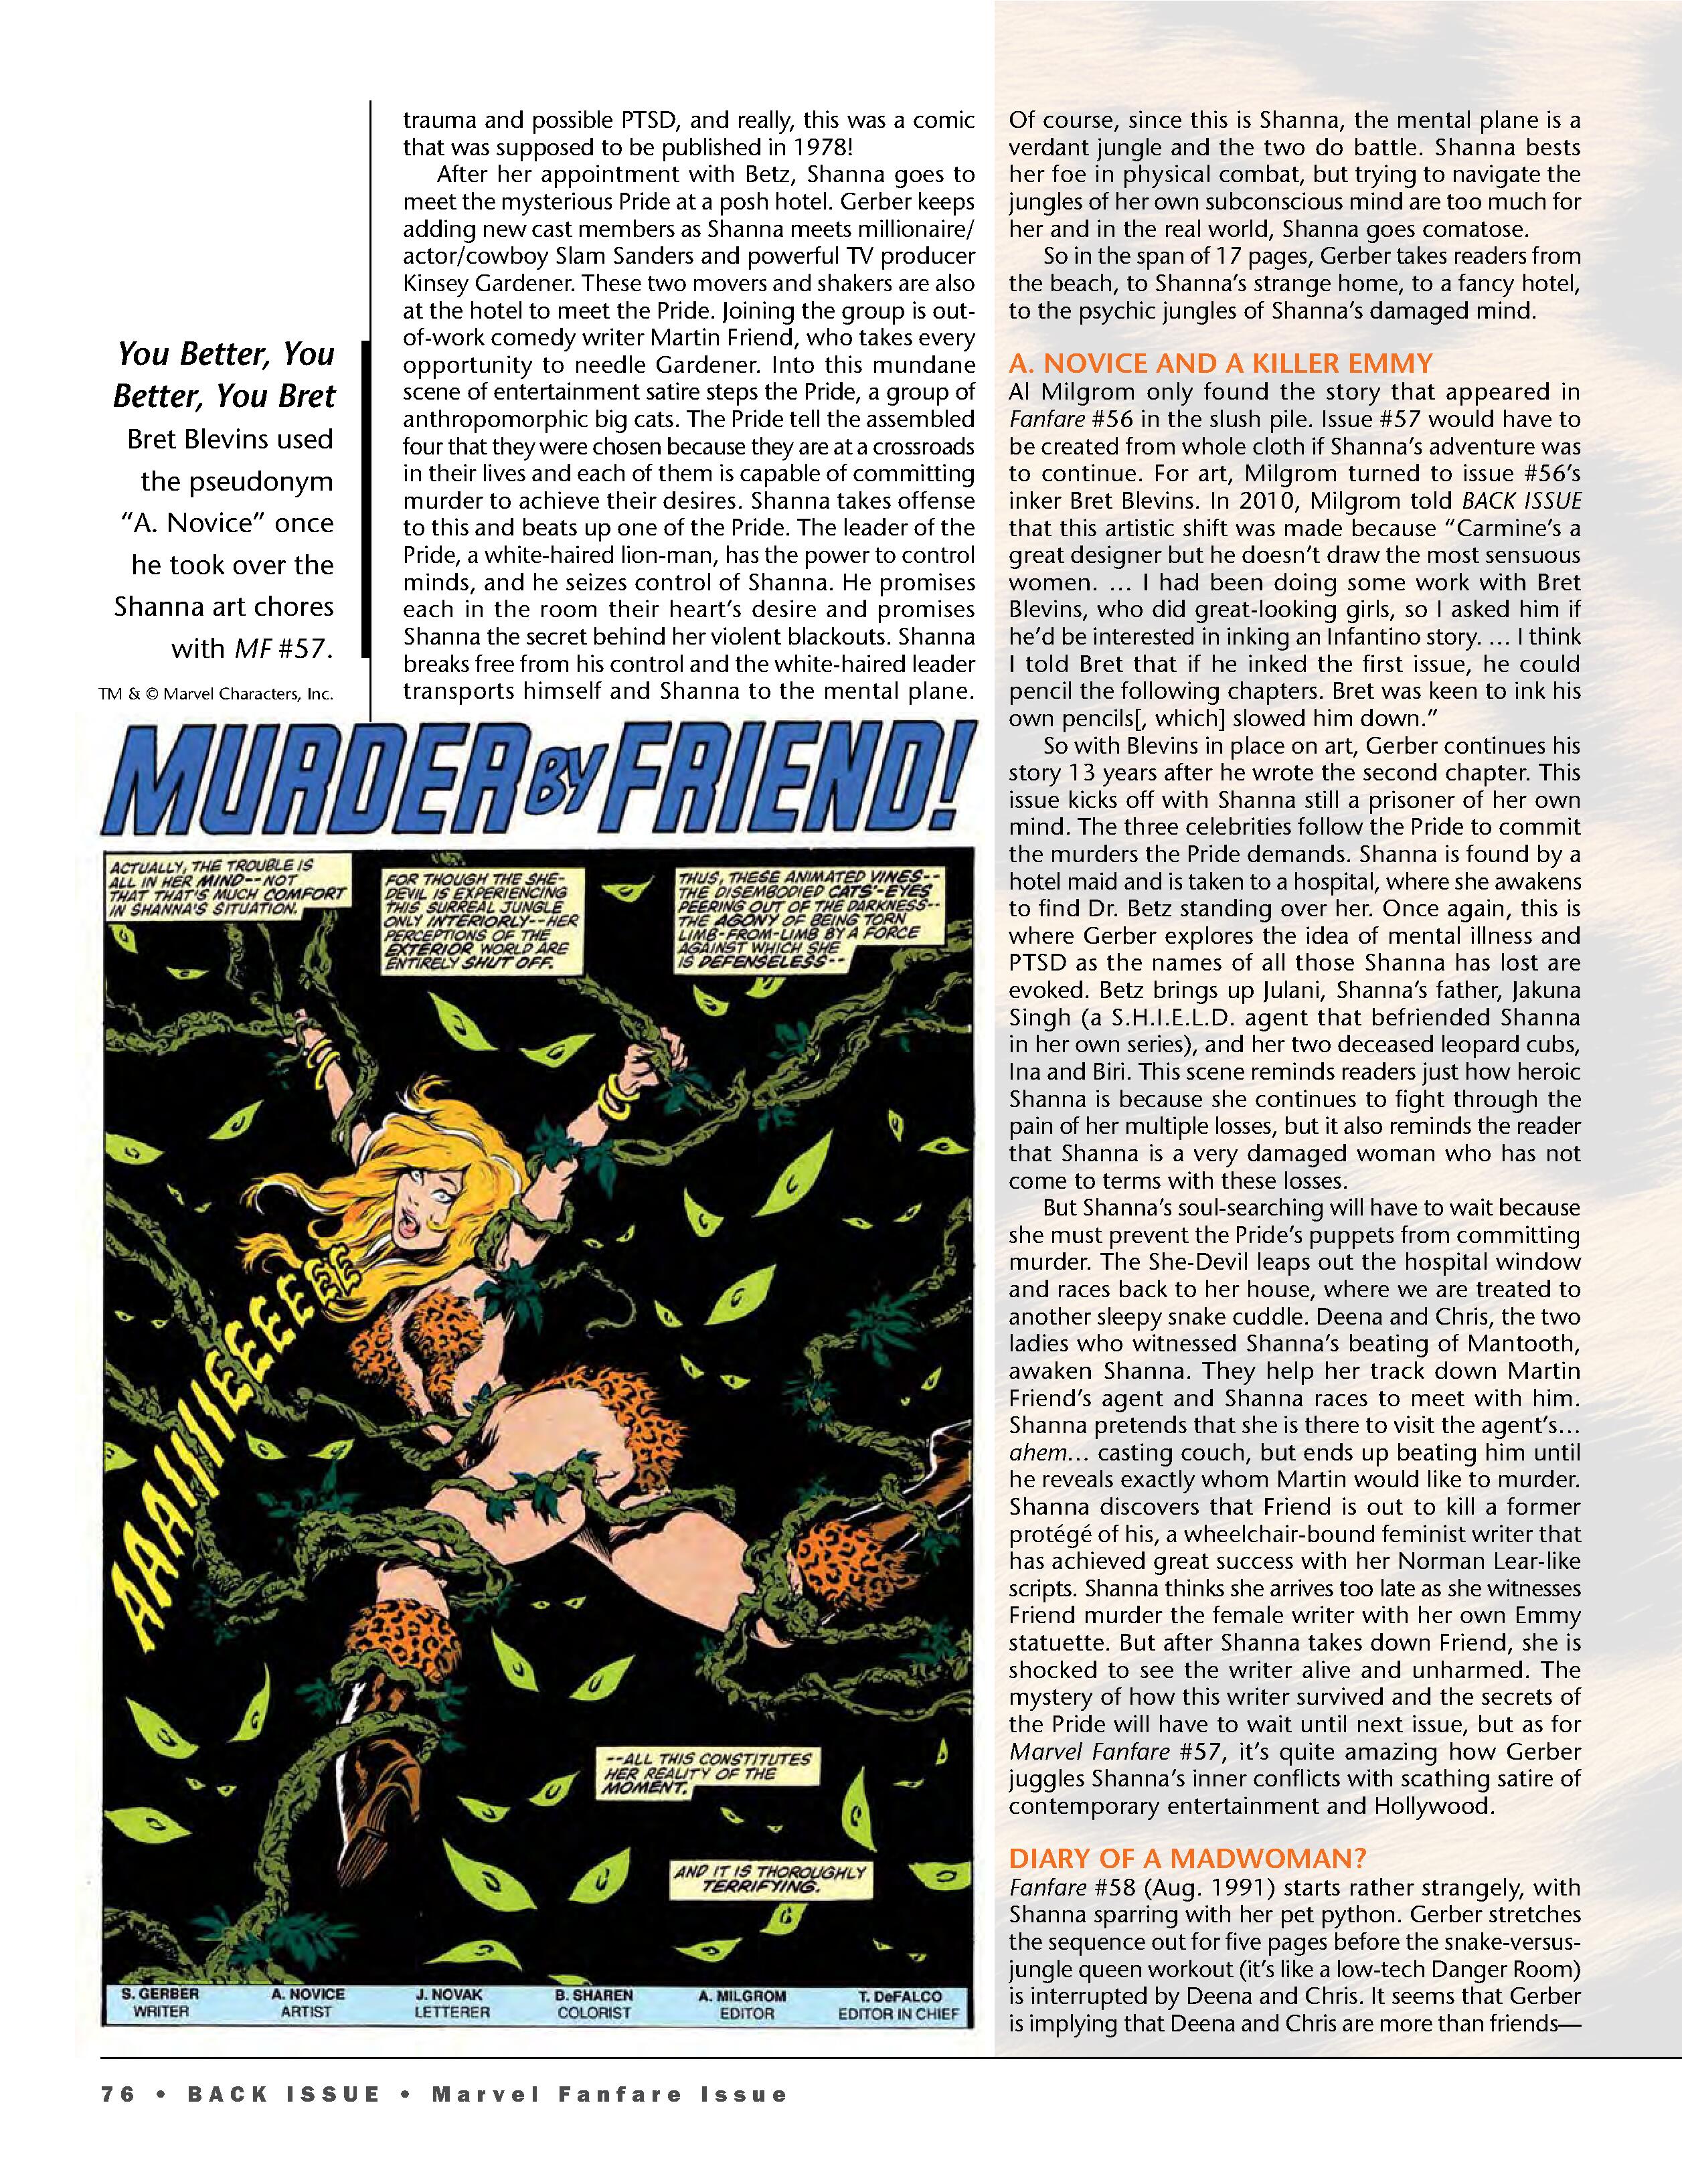 Read online Back Issue comic -  Issue #96 - 78